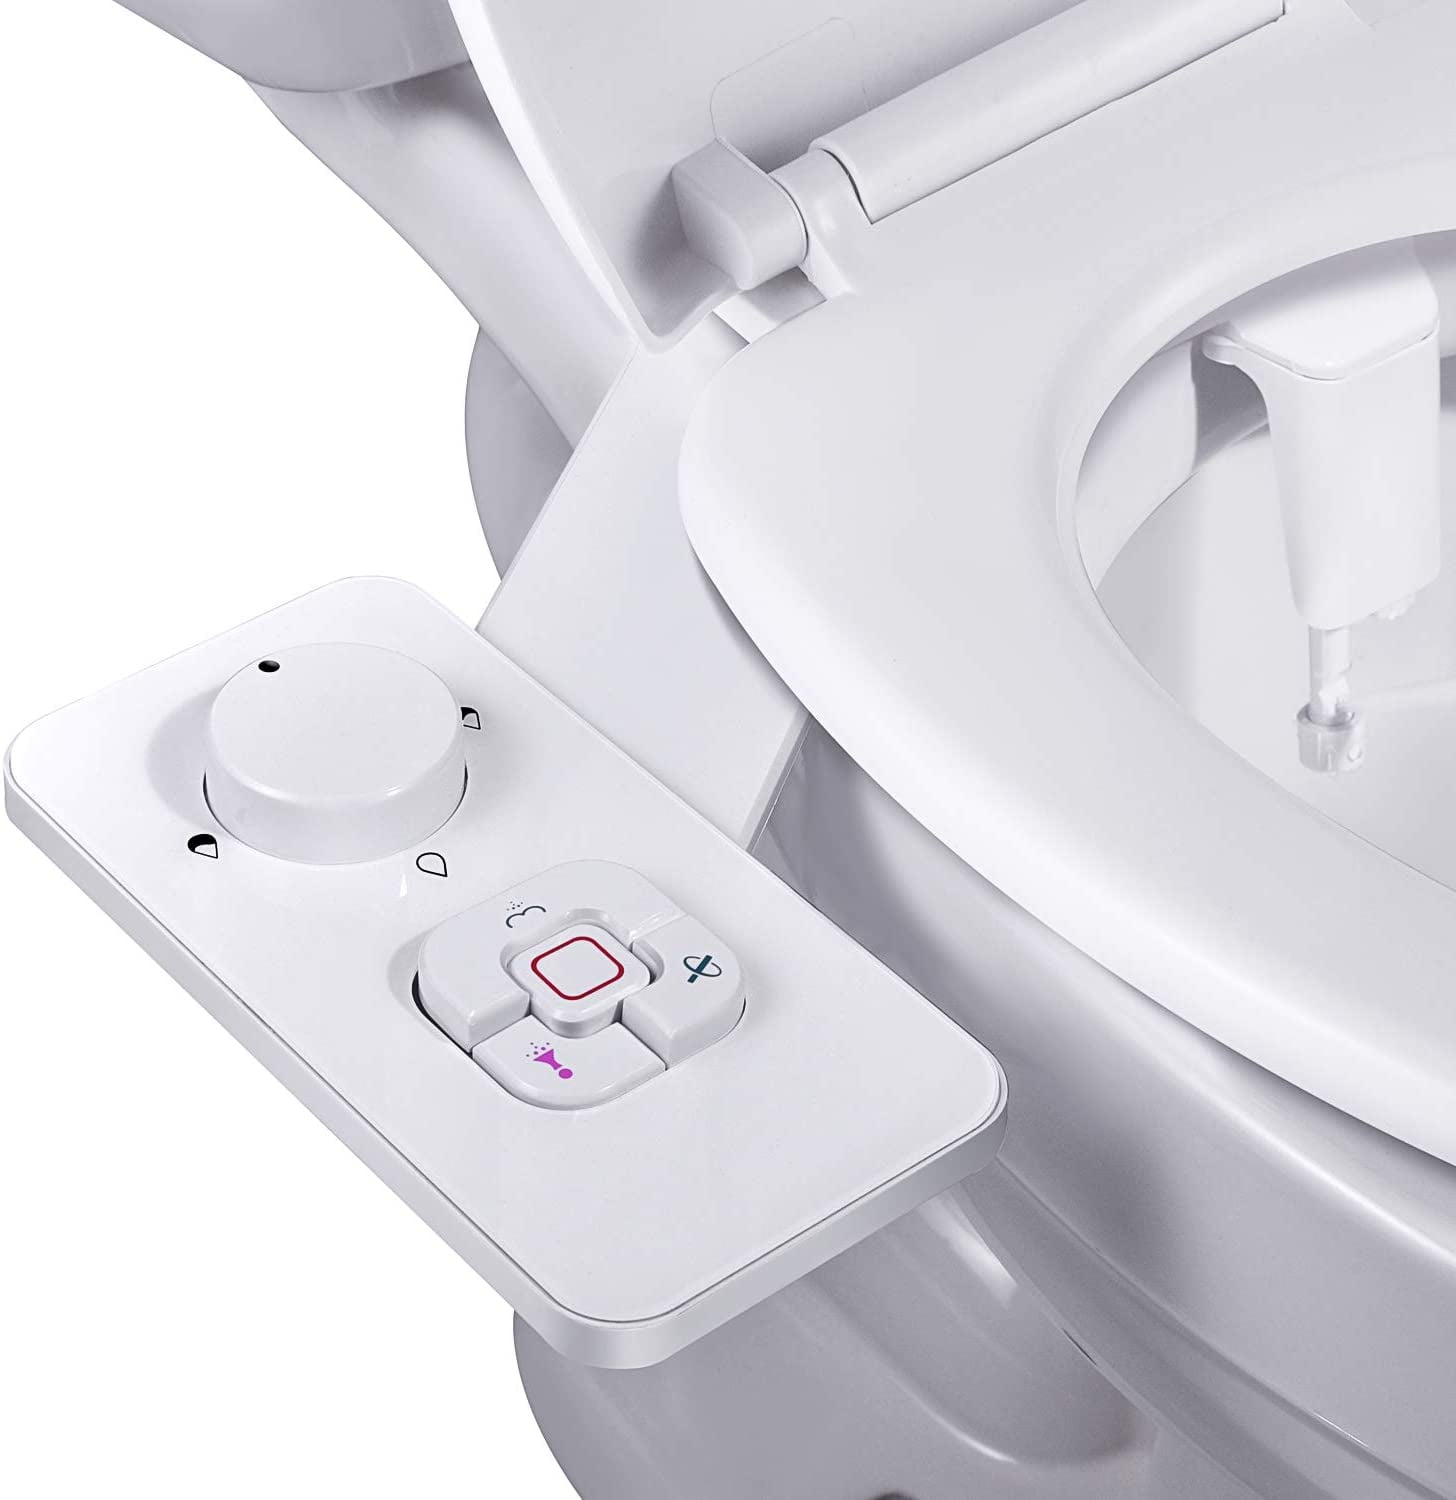 58bh Toilet Seat Bidet Dual Nozzle,Self Cleaning Nozzle Bidet Sprayer Set with Tube and T-Shaped Knot,Non Electric Bidet Toilet Attachment